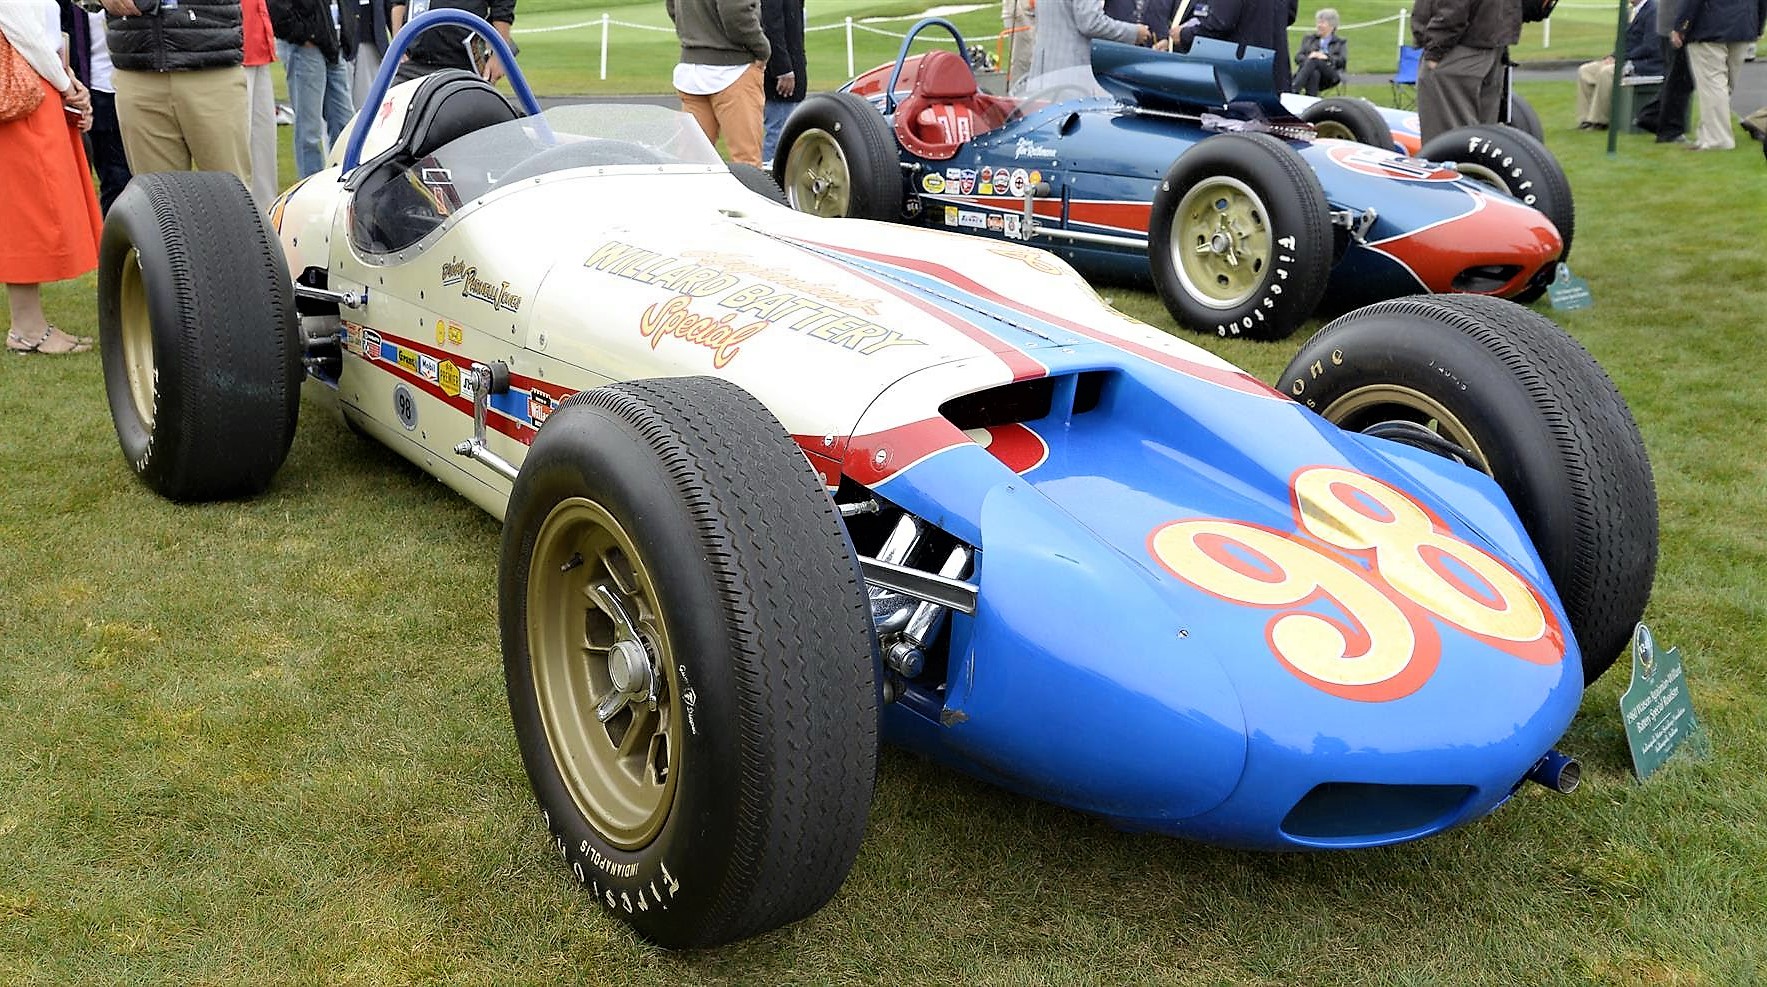 The 1963 Agajanian Willard Battery Watson Special, one of the last roadsters to win the Indy 500 